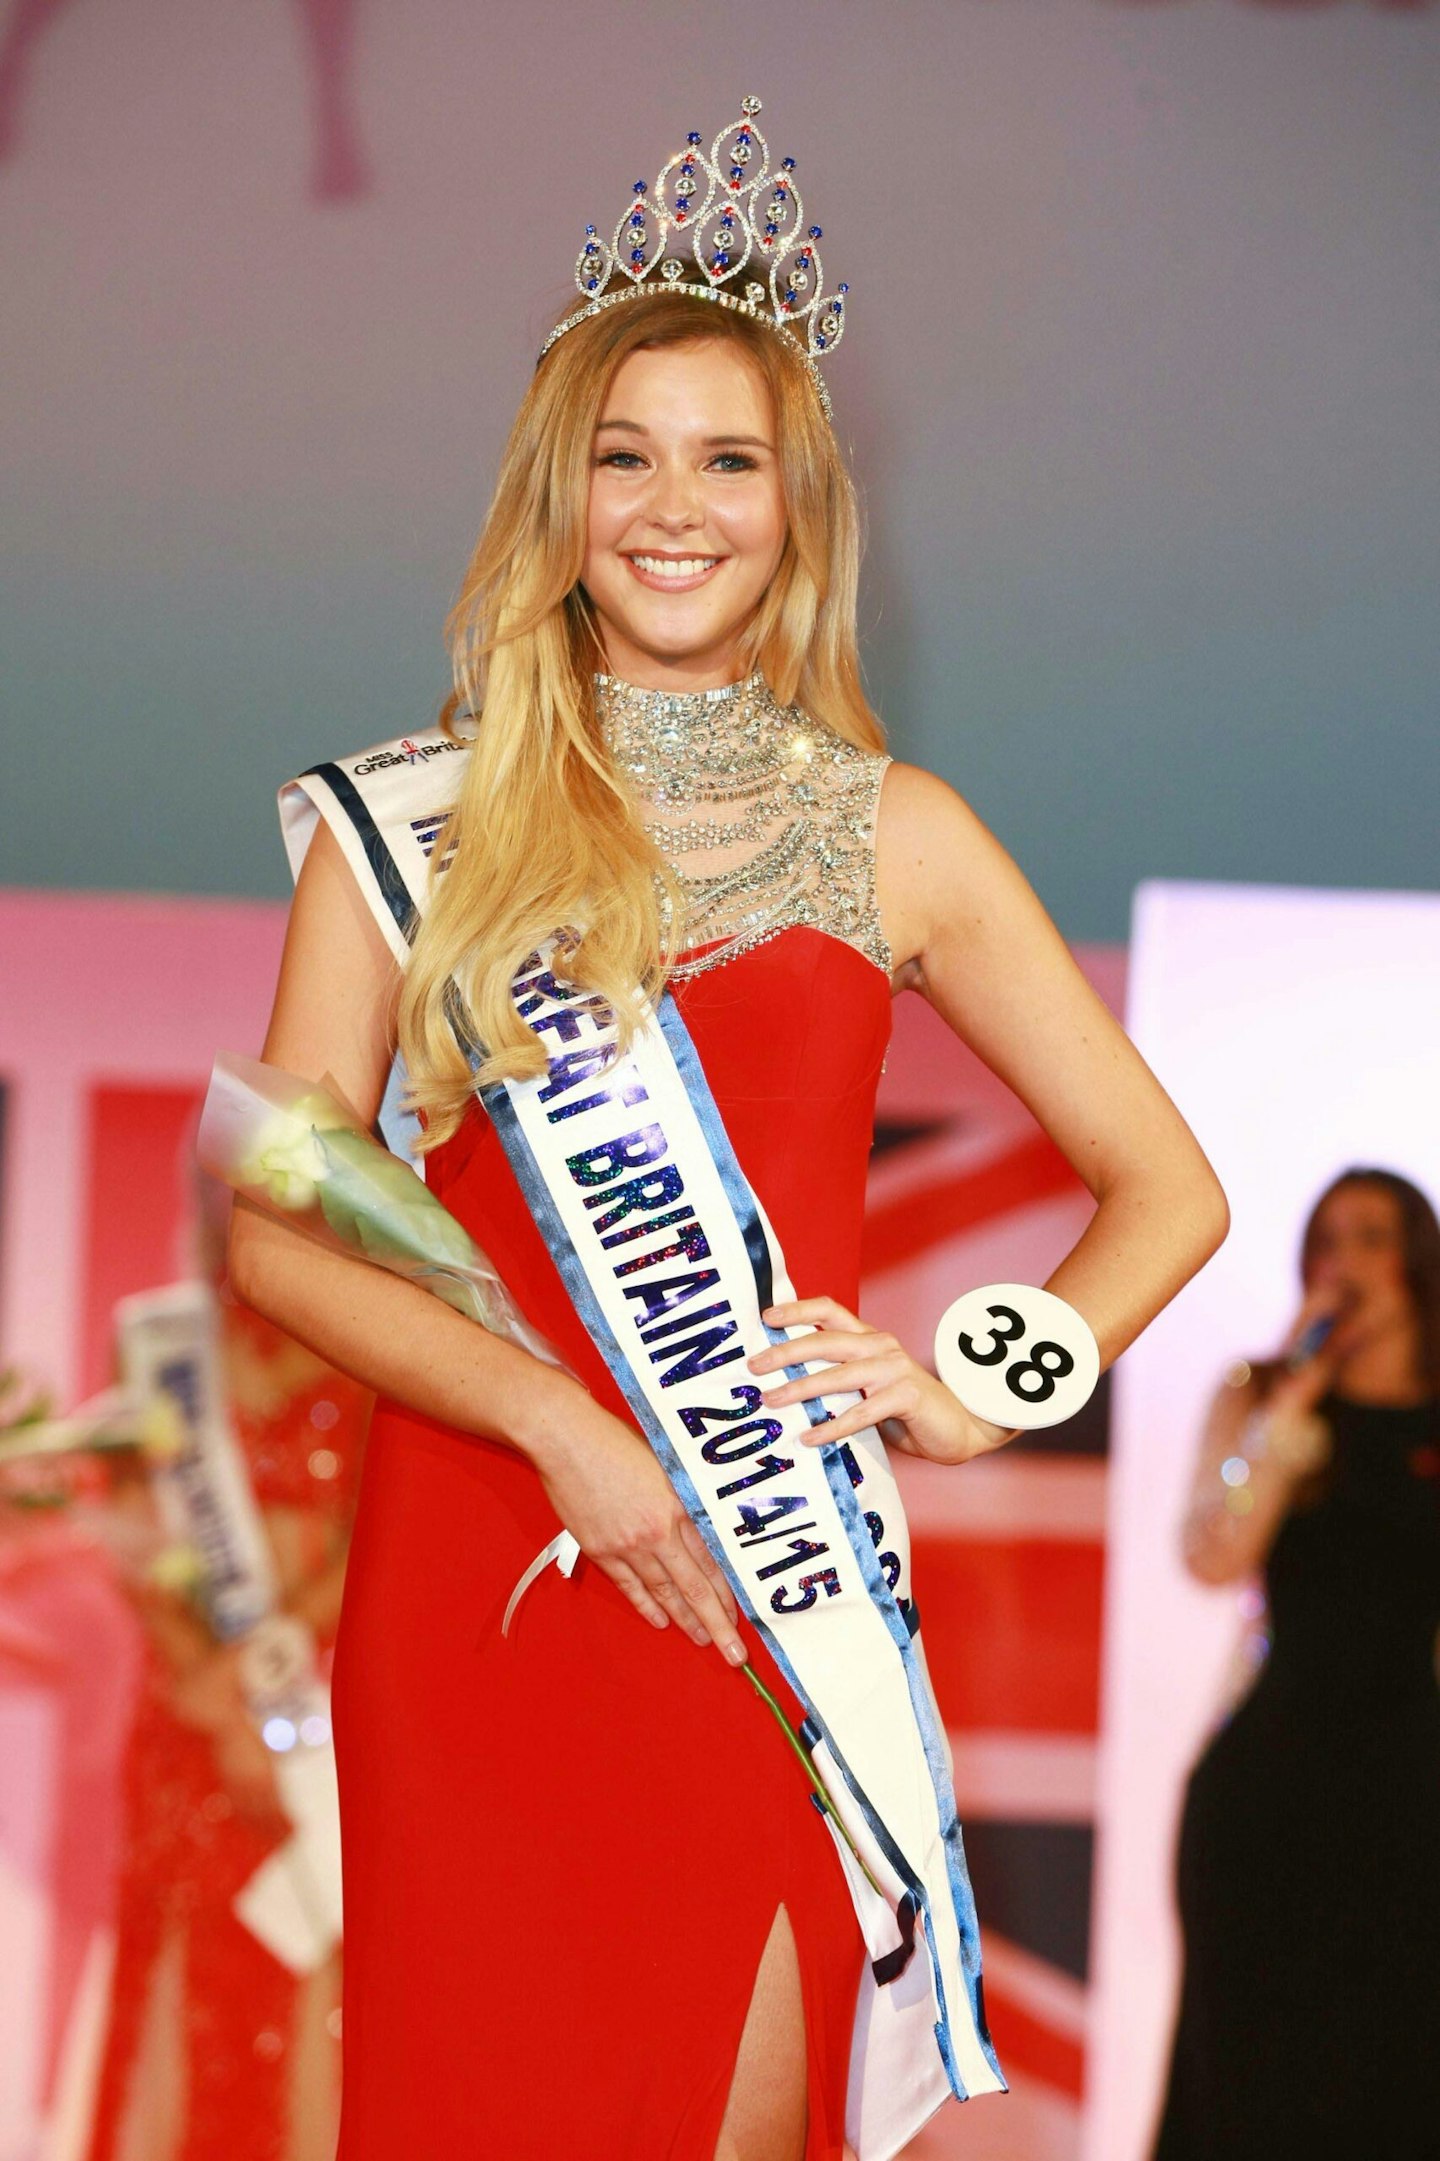 Shelby Tribble in her Miss GB crown and sash